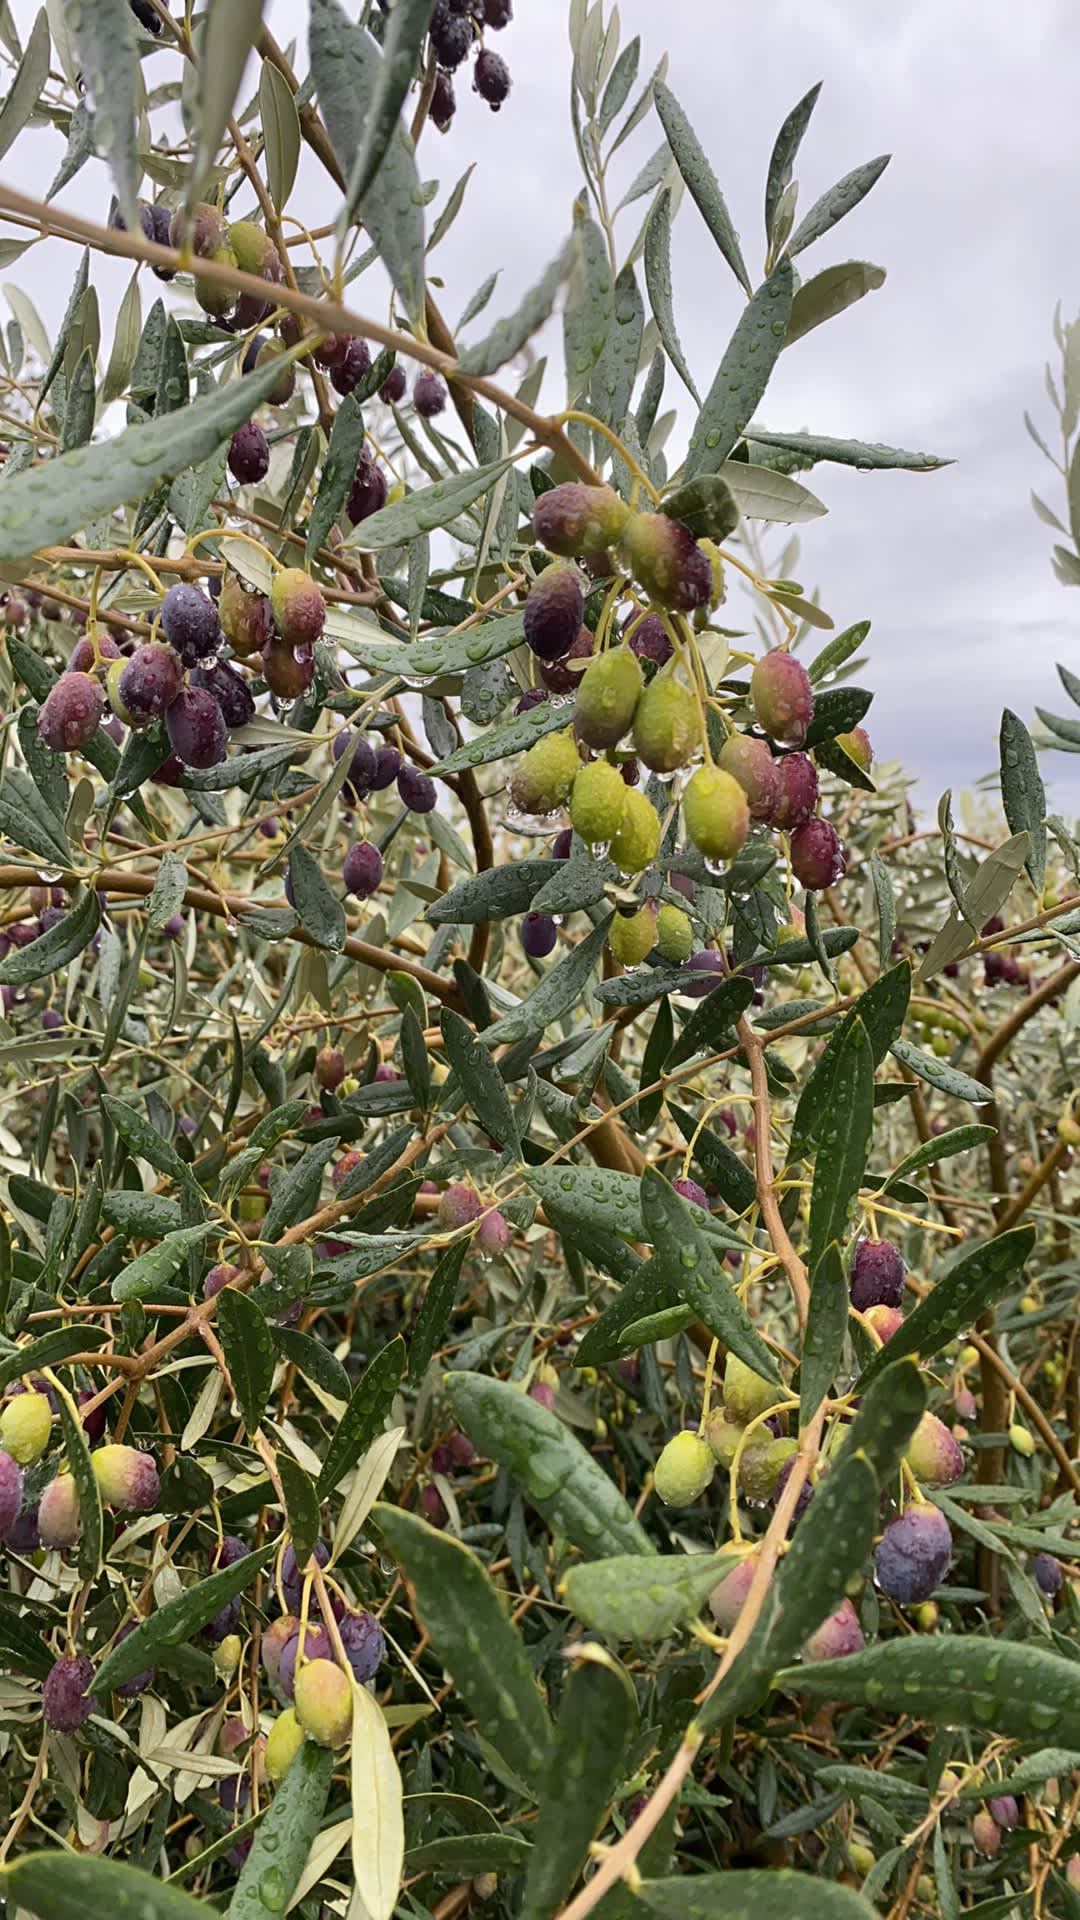 This year has been good for olives. Pick whatever you need and we can tell you the best way of curing them.